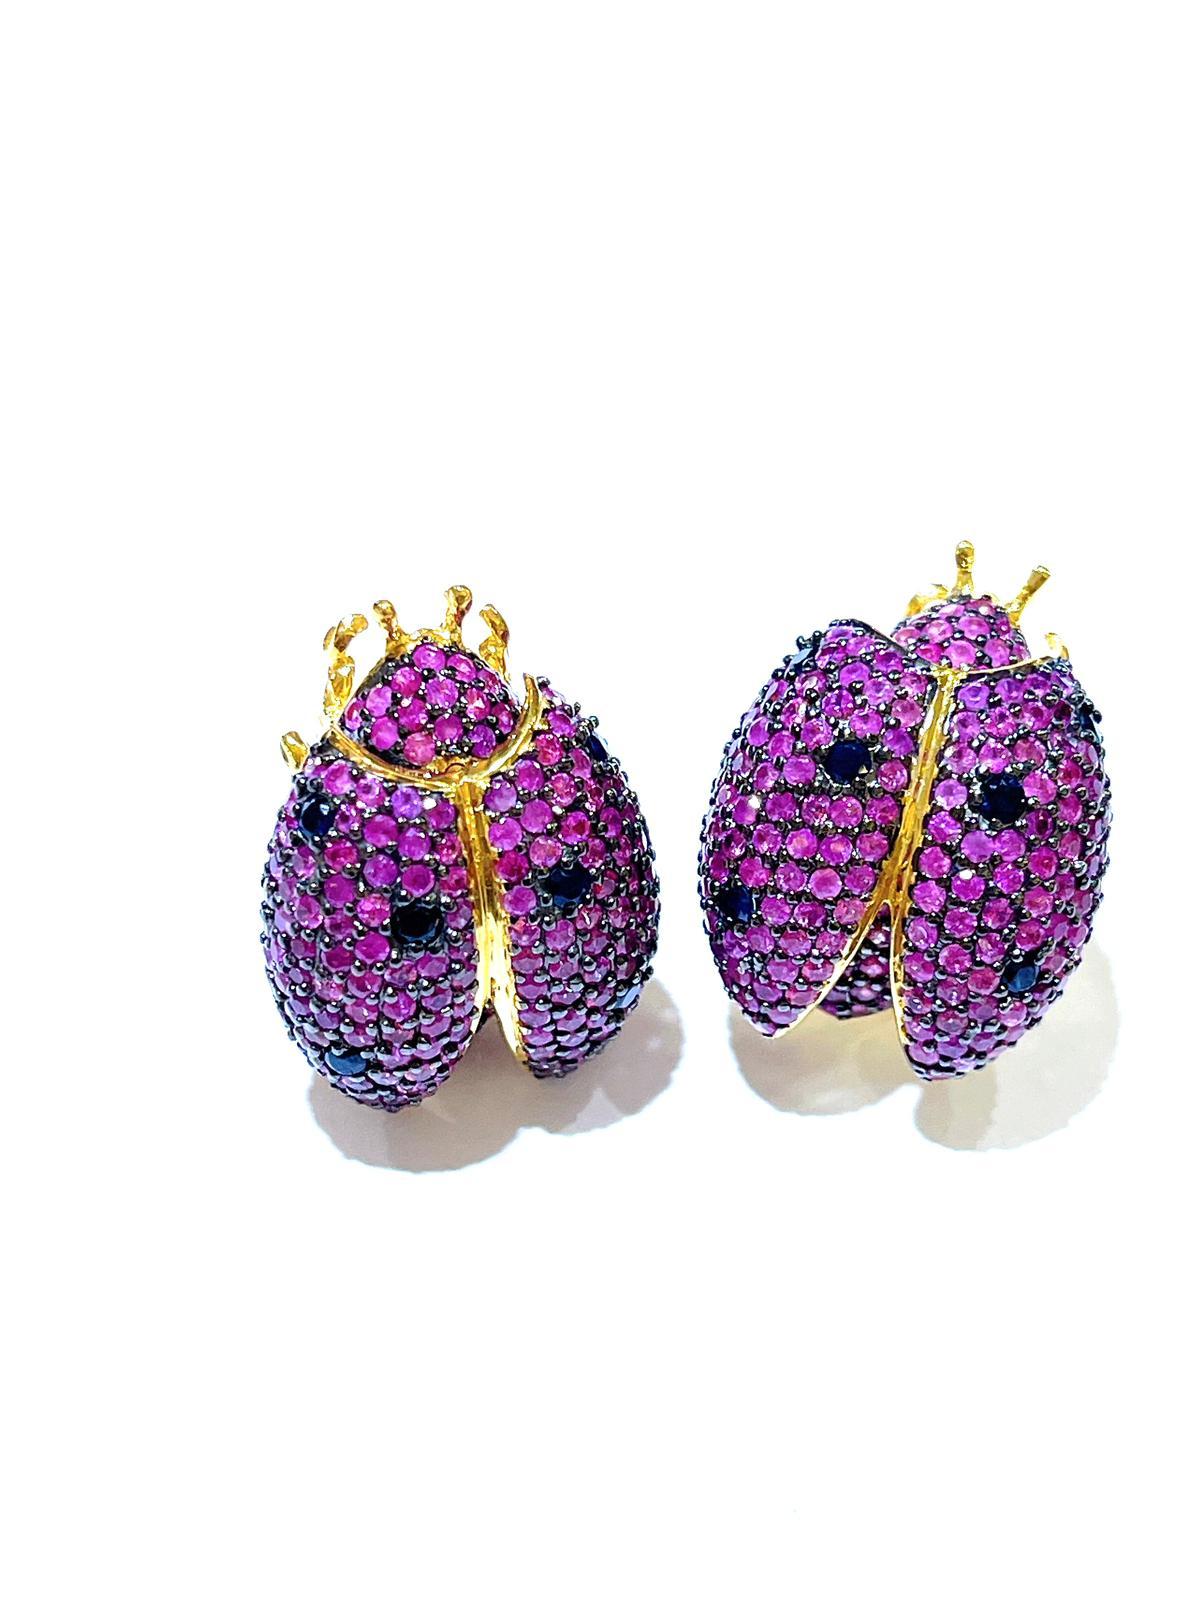 Bochic “Orient” Retro Pink Sapphire Beatle Earrings Set In 18K Gold & Silver  In New Condition For Sale In New York, NY